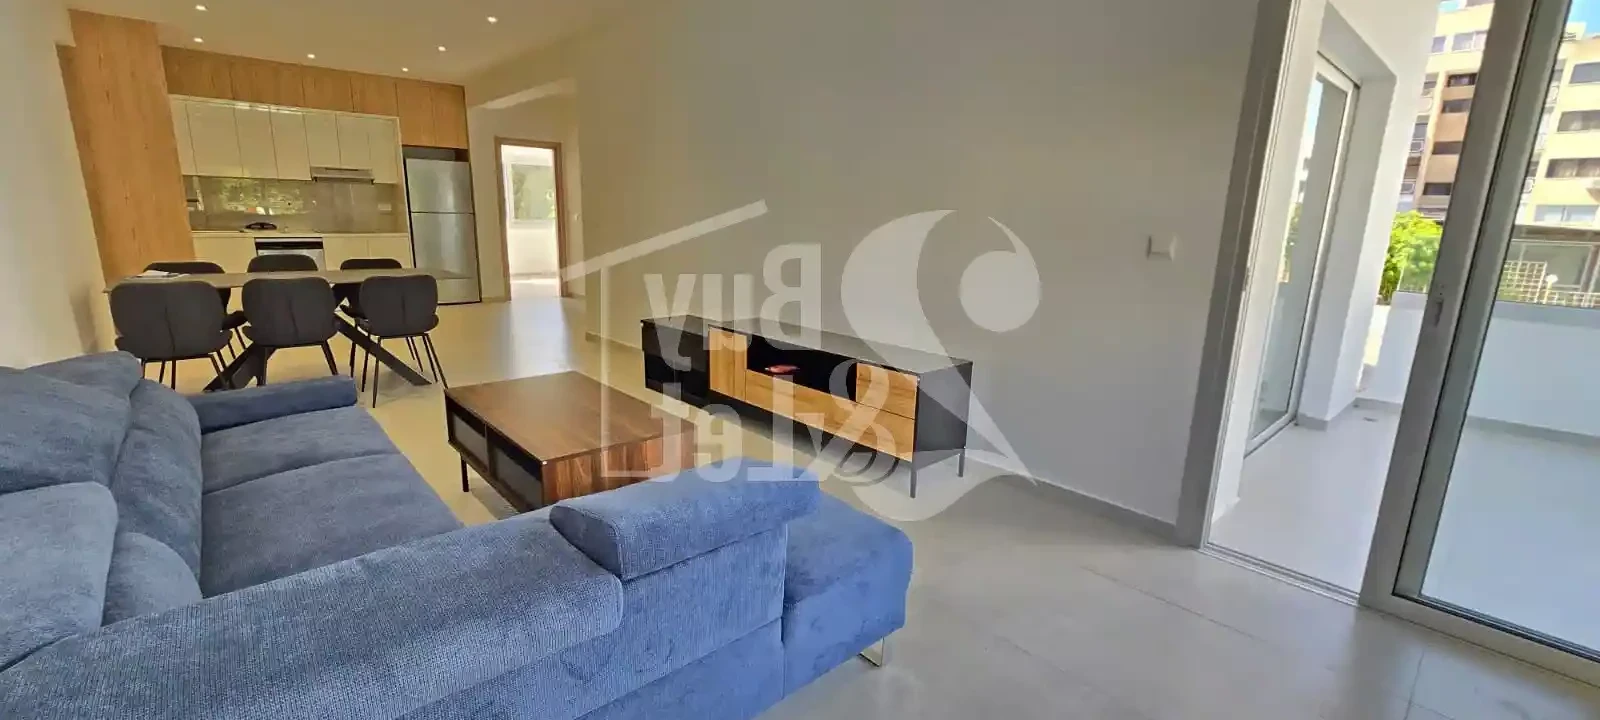 3-bedroom apartment fоr sаle €395.000, image 1